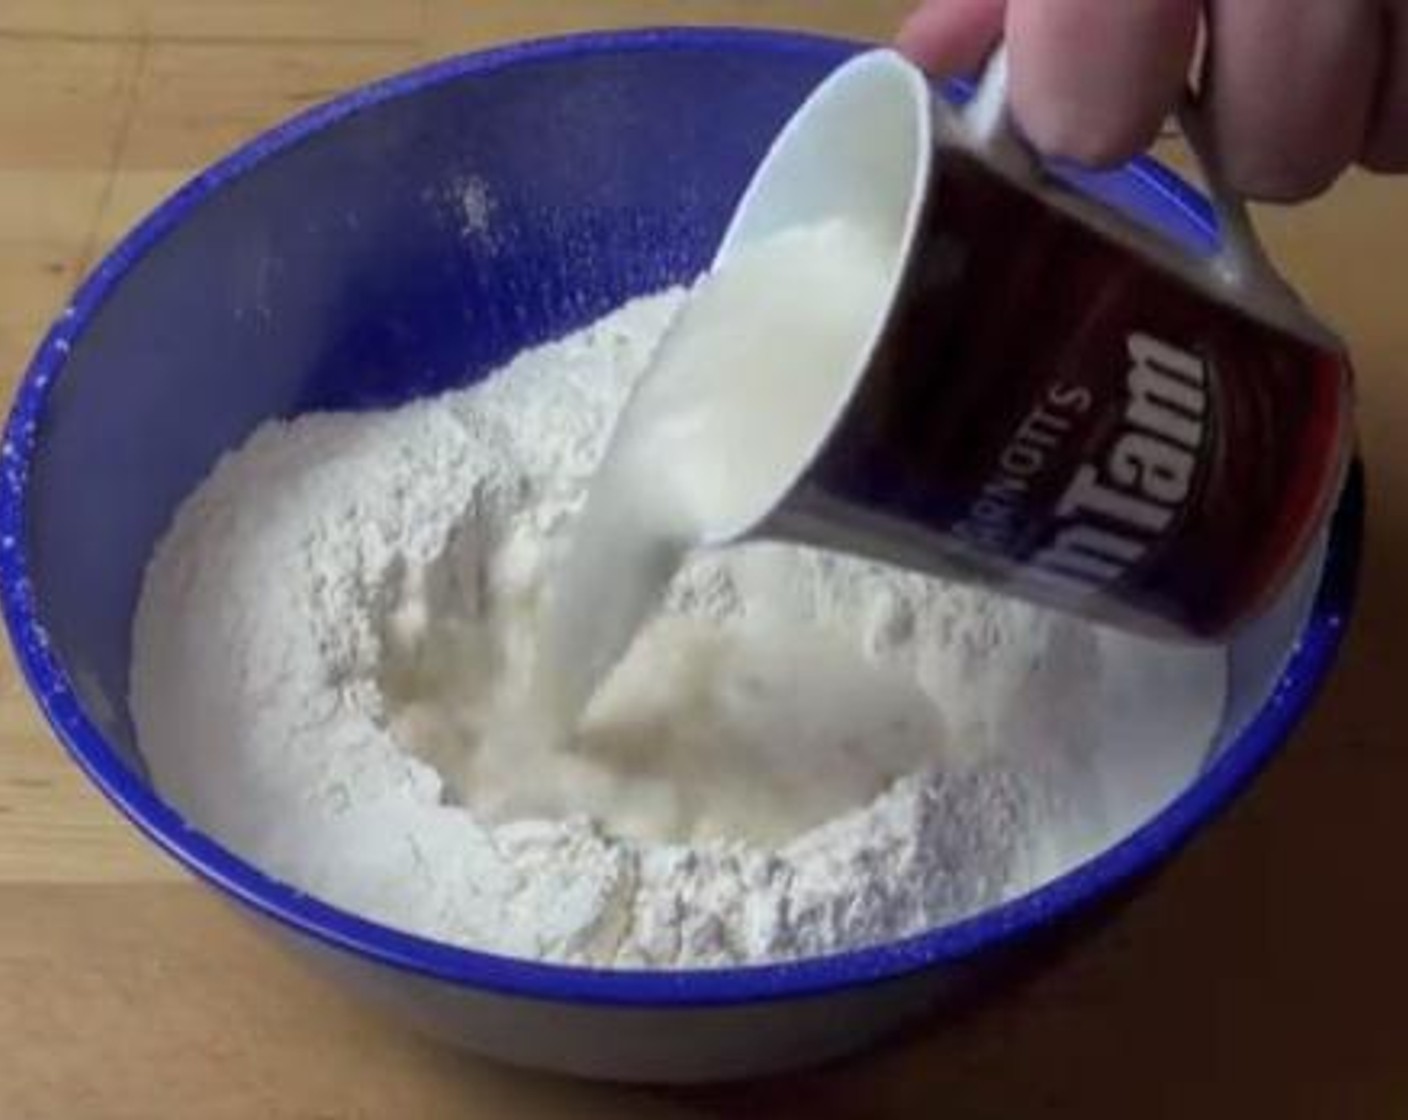 step 2 Into a mixing bowl, sift the All-Purpose Flour (3 cups). Add the Salt (1 tsp), Olive Oil (1 Tbsp) and the yeast mixture. Gently mix together until a nice soft dough forms.